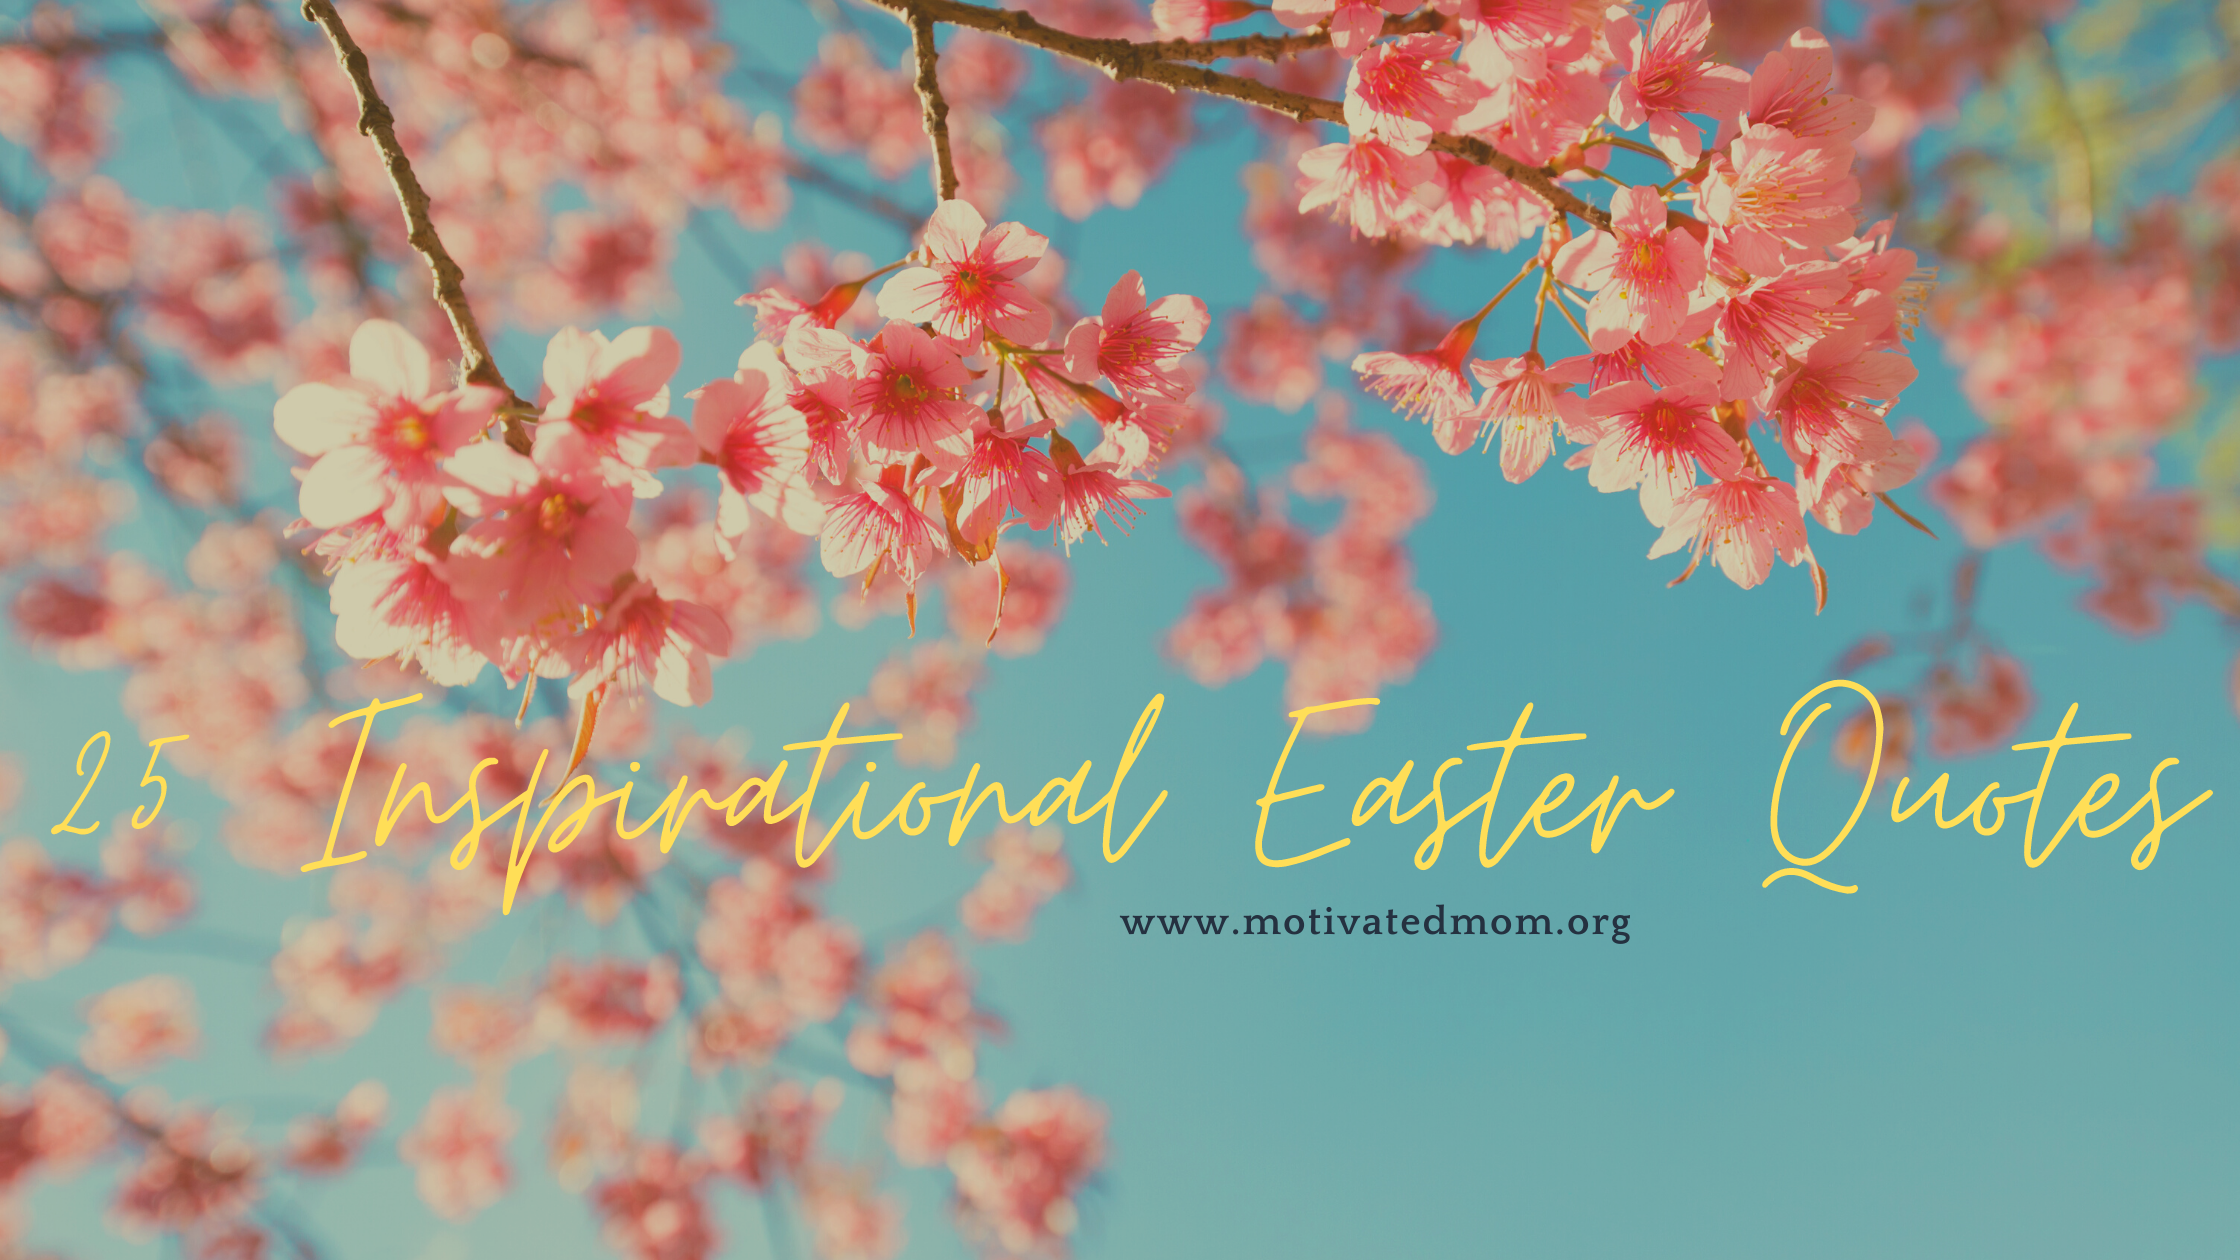 Inspirational Easter Quotes - Motivated Mom